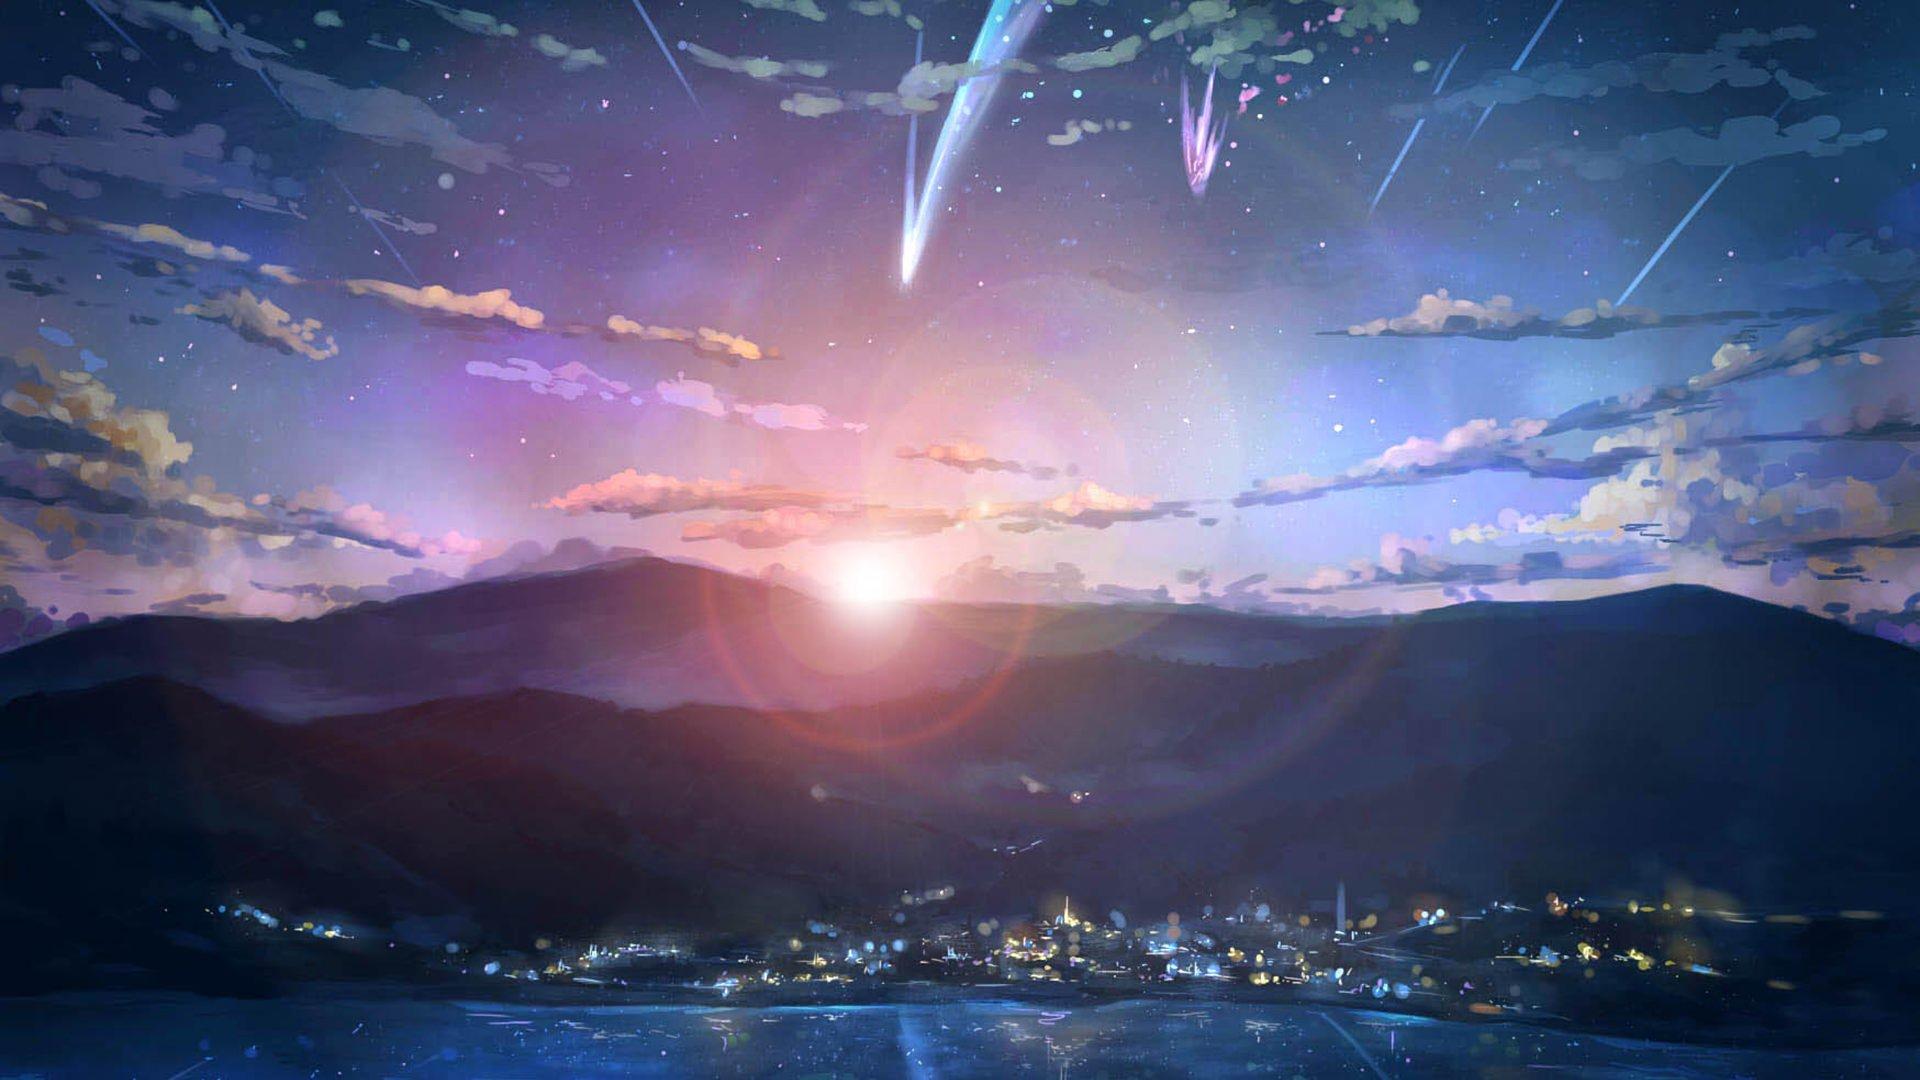 Your Name Anime Landscape Wallpapers - Top Free Your Name Anime